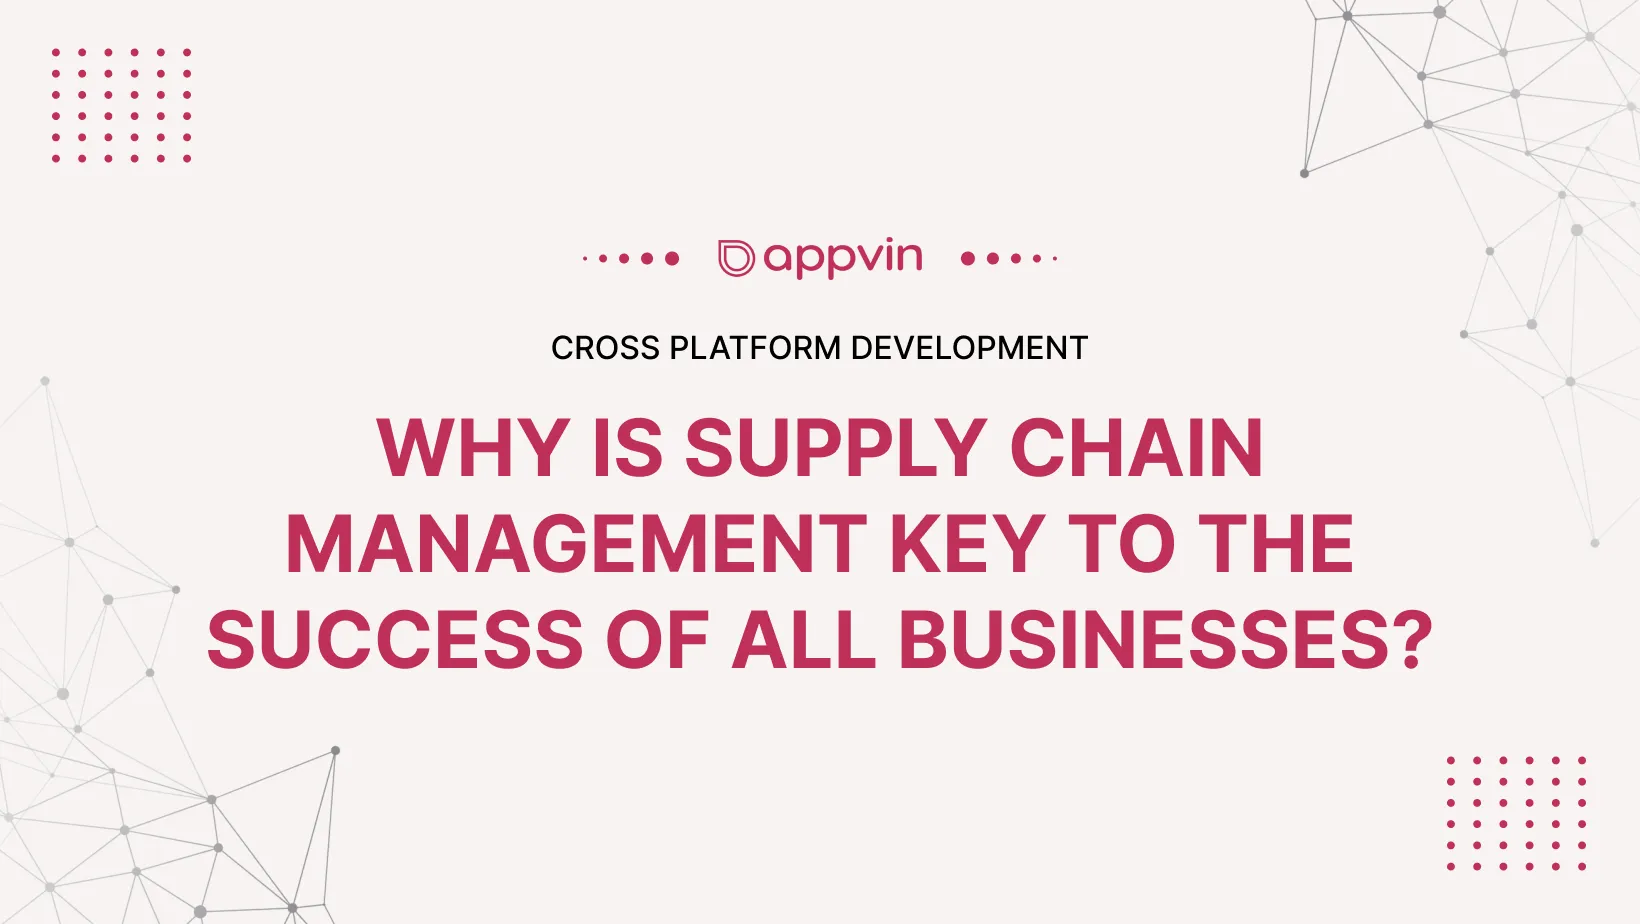 Why supply chain management is key to success of all business?